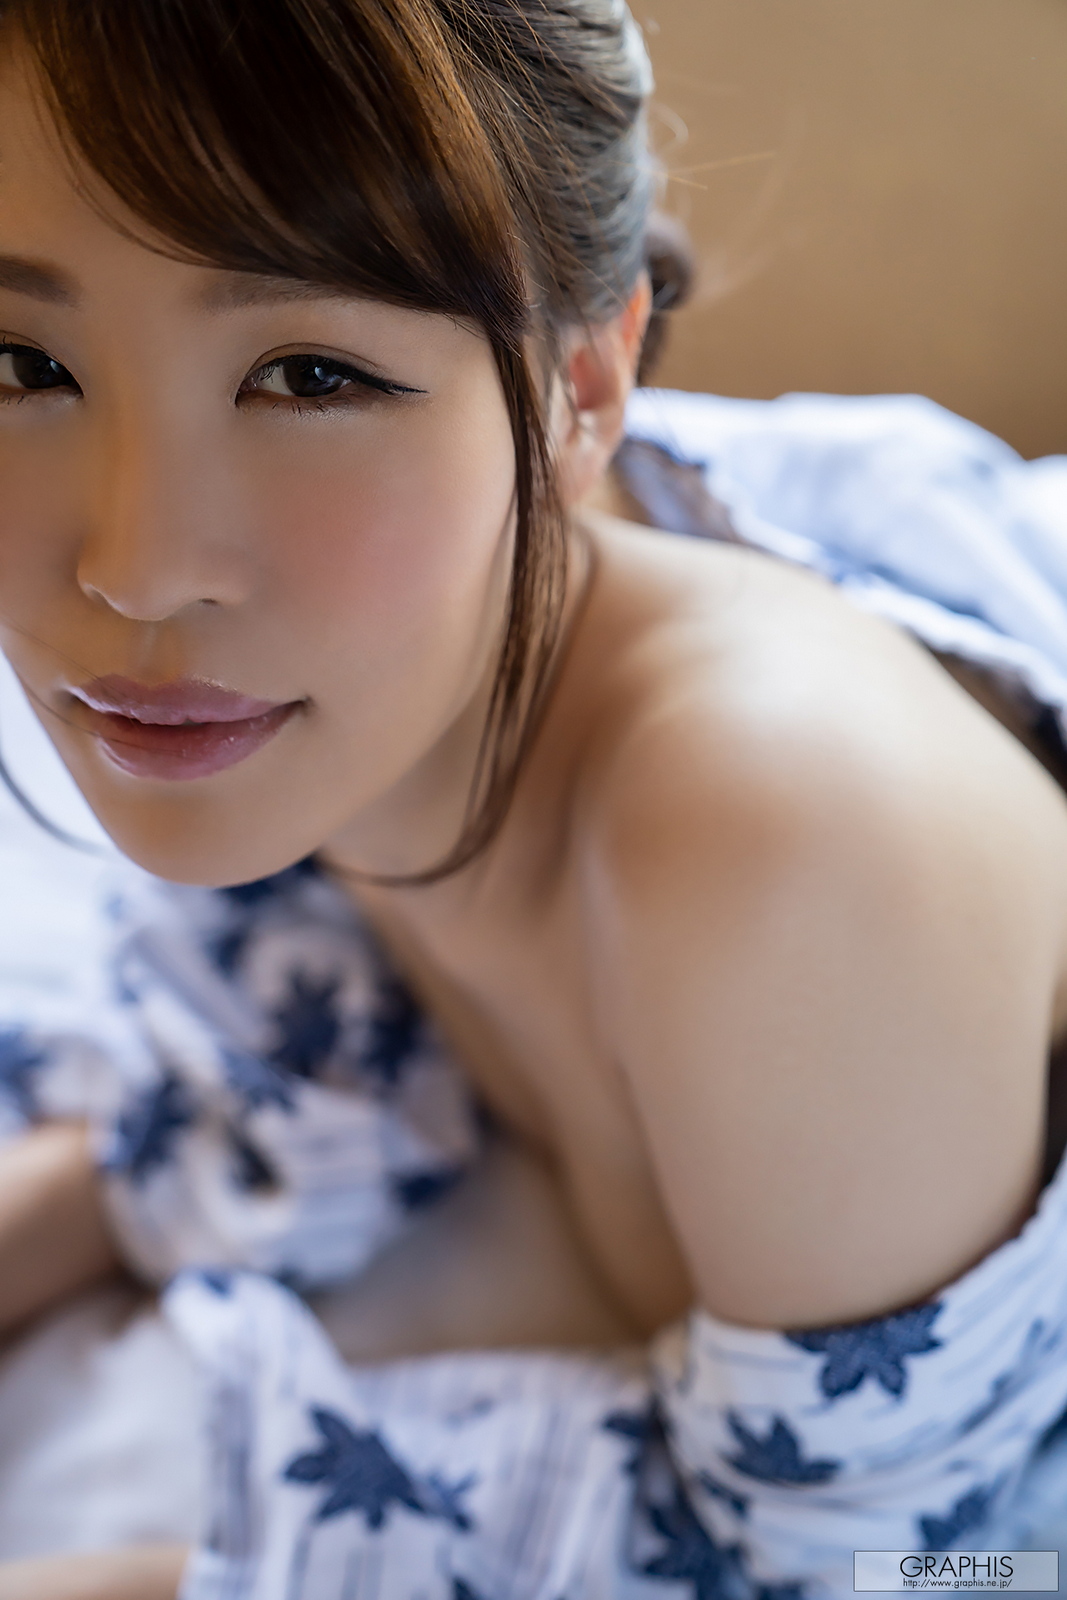 toka-rinne-nude-japanese-boobs-hairy-pussy-graphis-32